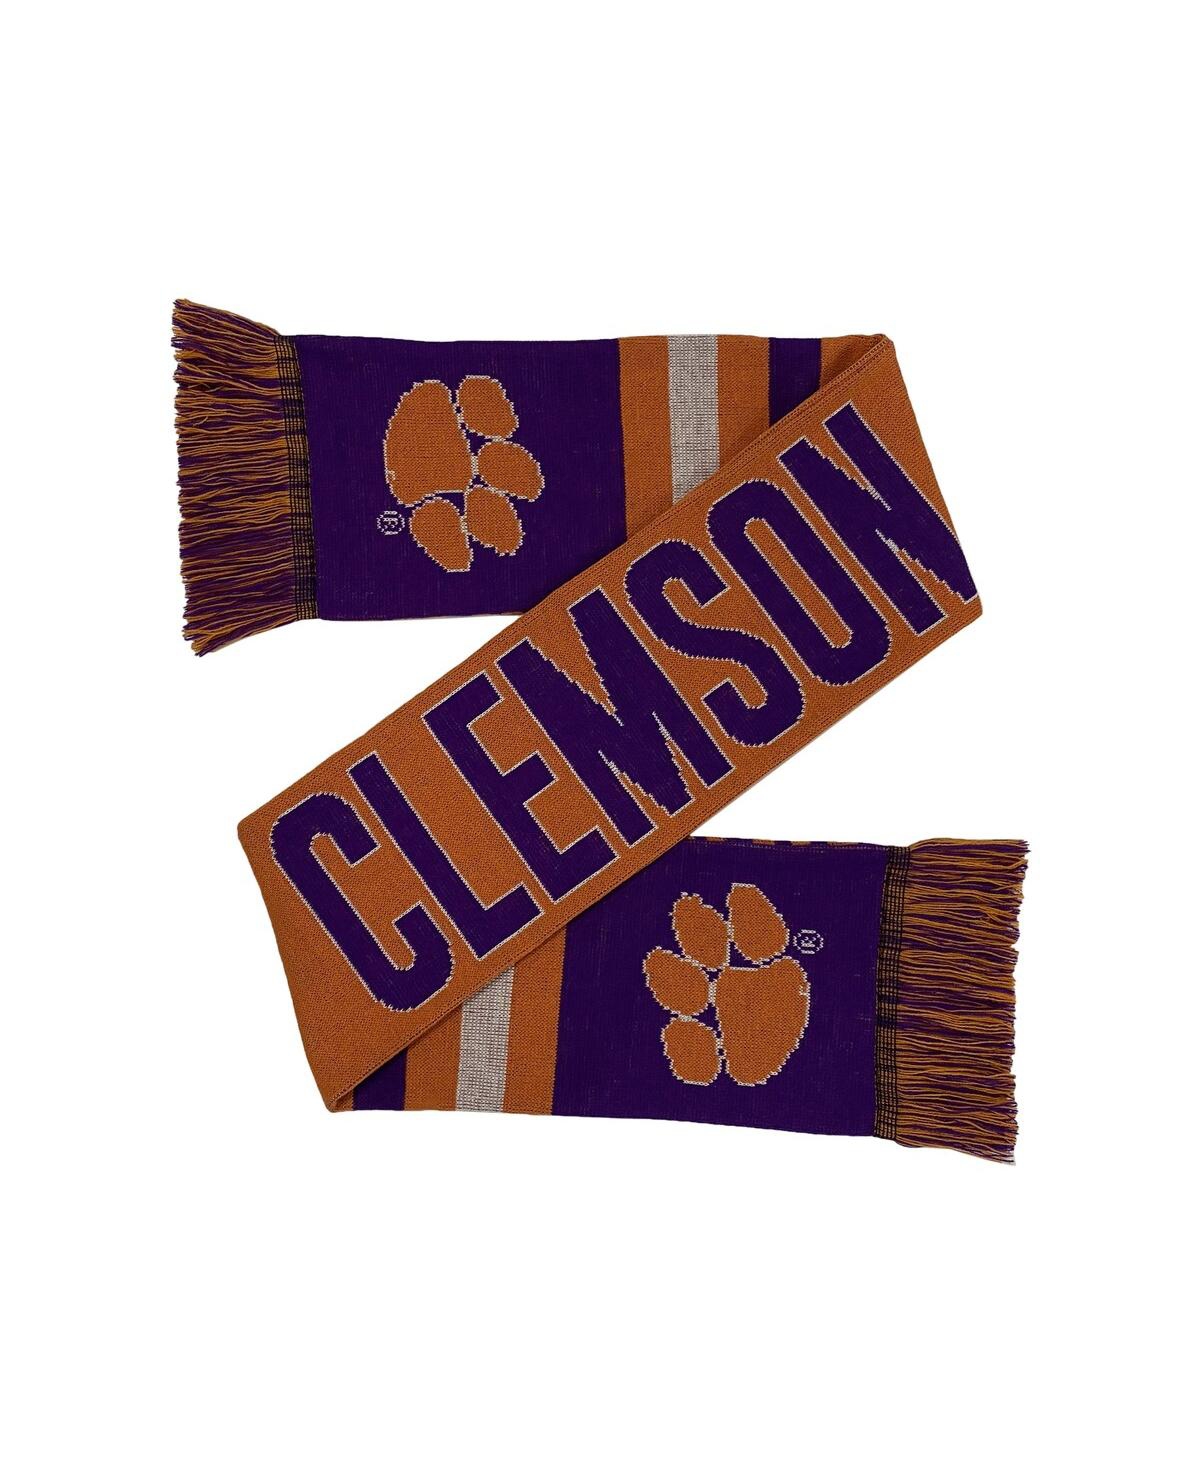 Men's and Women's Clemson Tigers Reversible Thematic Scarf - Multi